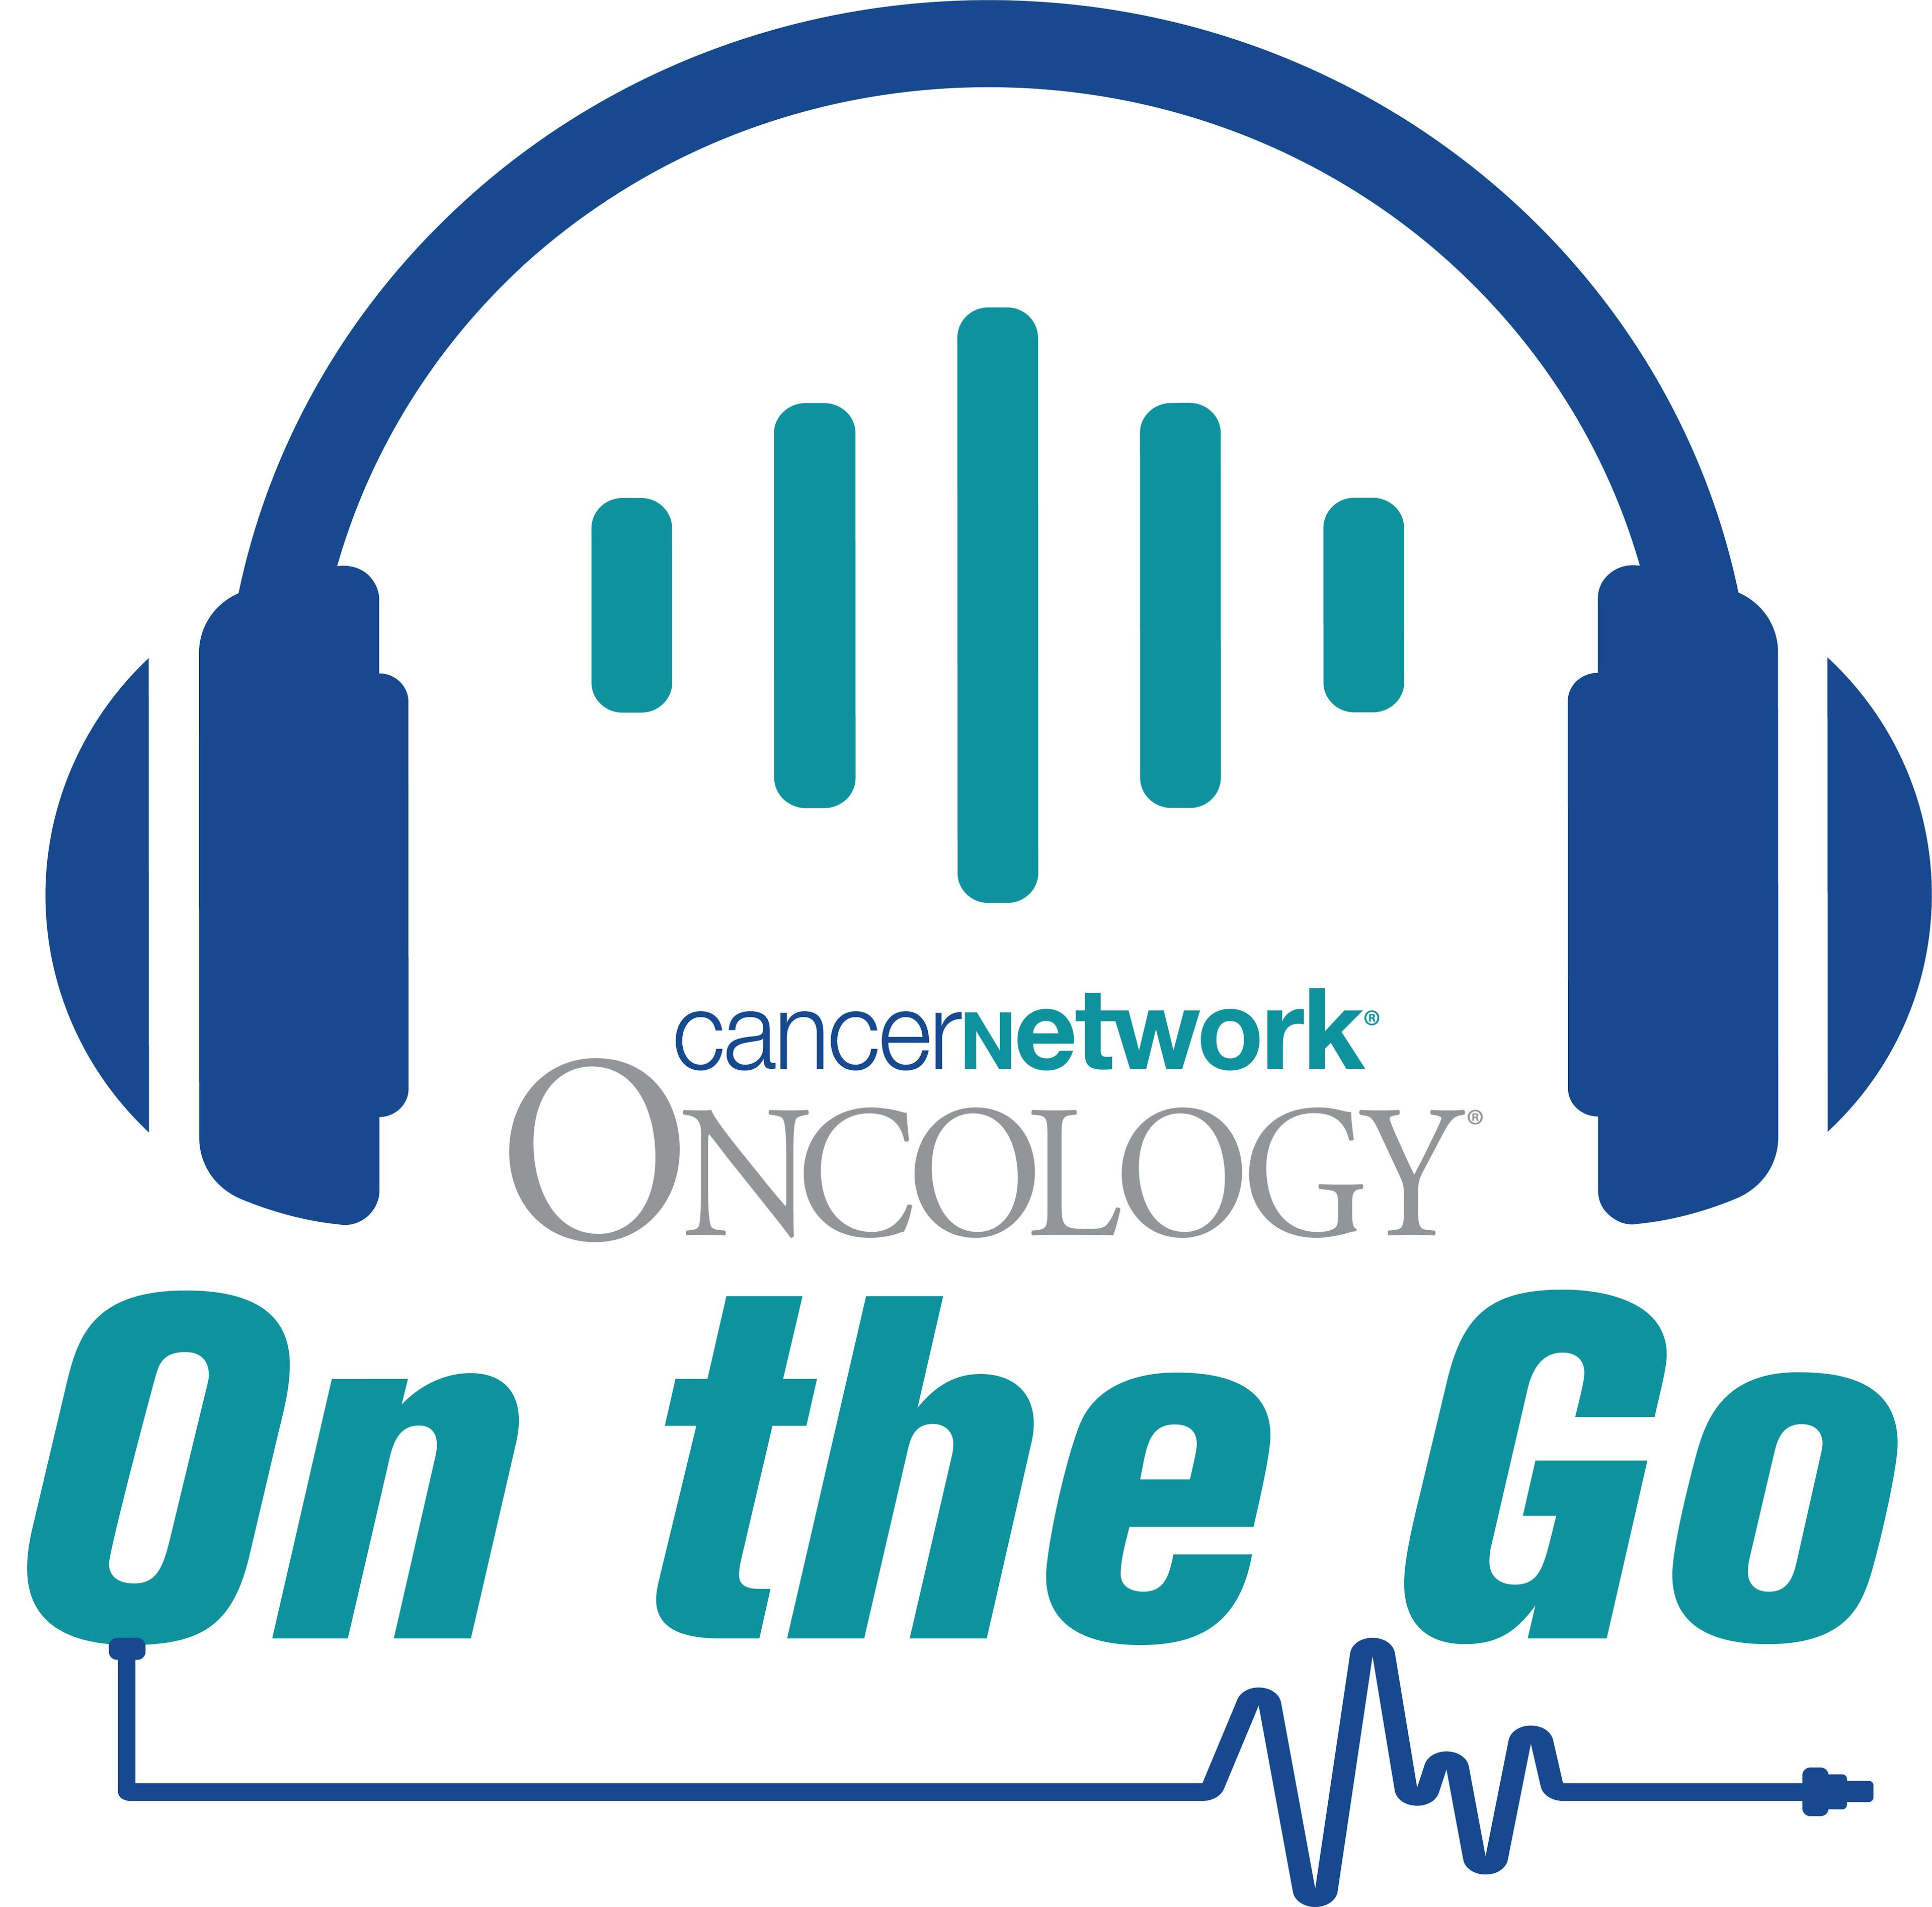 Minh-Tri Nguyen, MD, spoke with CancerNetwork® about differences between time to treatment, socioeconomic status, and clinical outcomes in rural and urban patients with breast cancer.